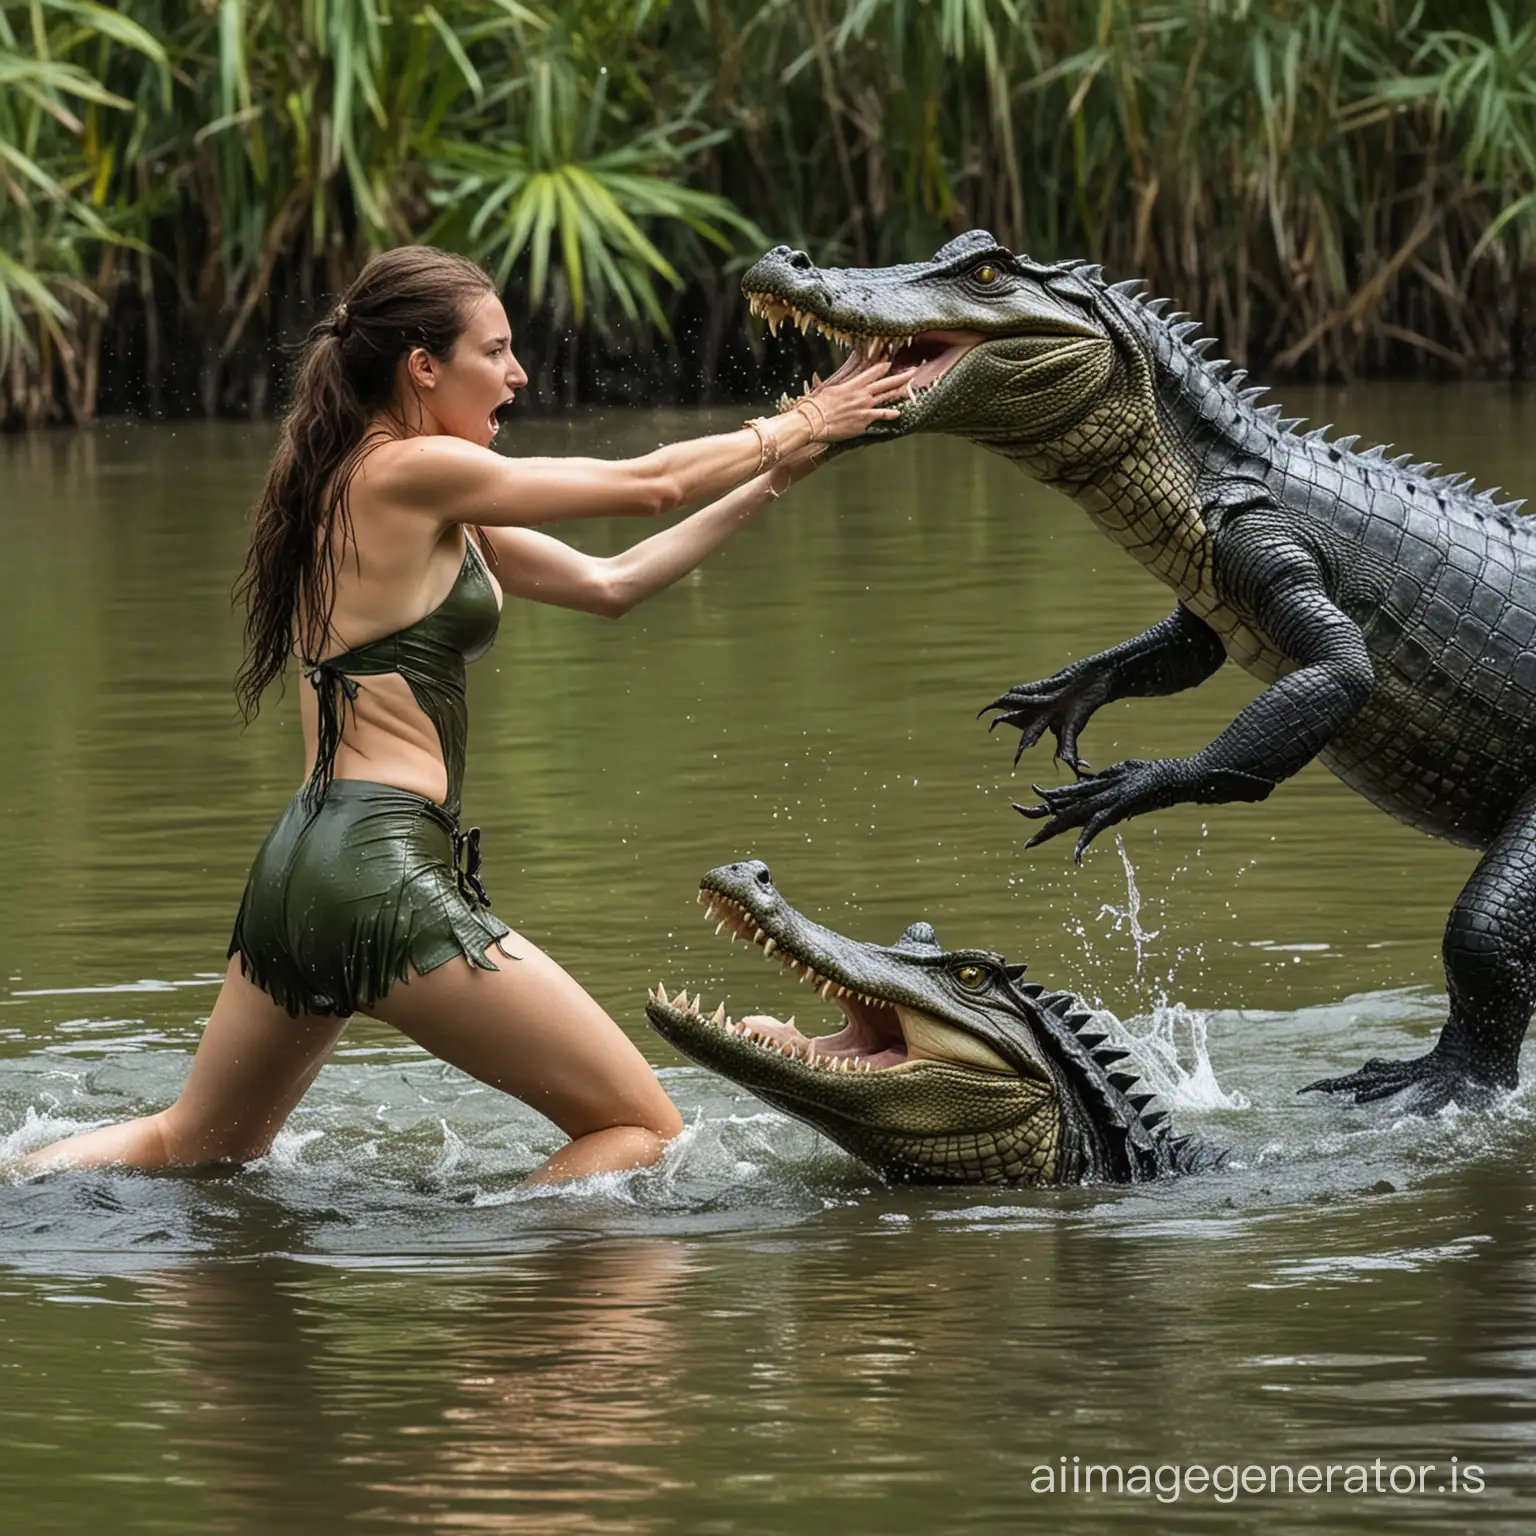 Courageous-Water-Nymph-Battling-Alligator-in-Murky-Swamp